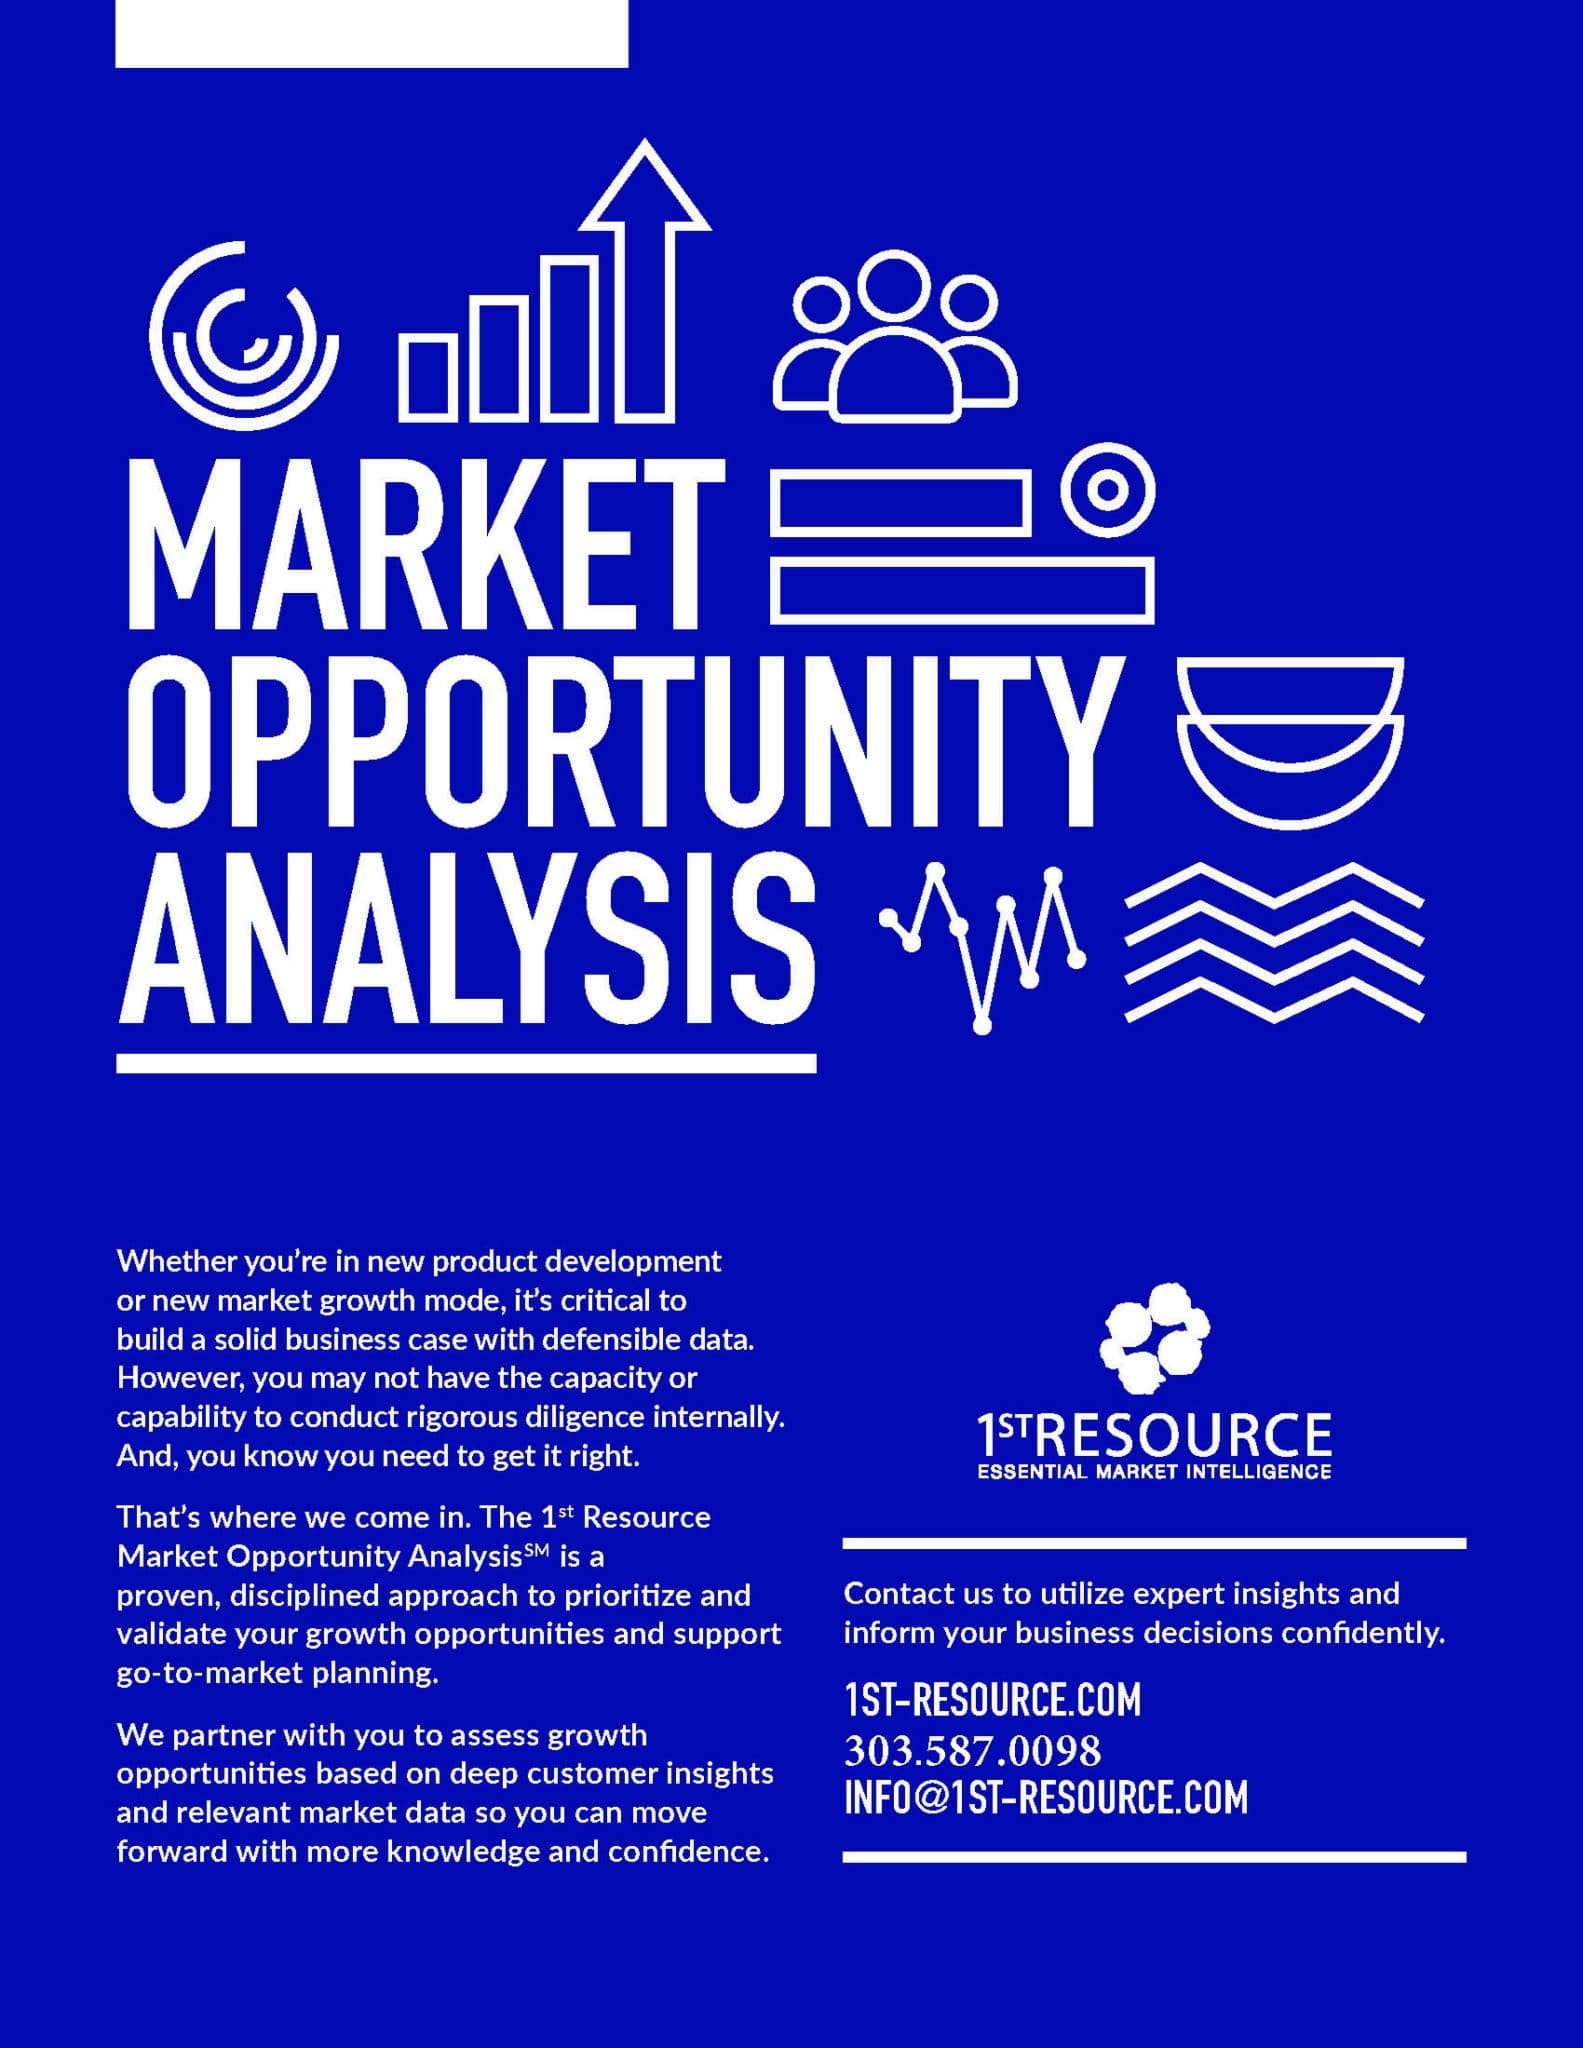 1st Resource Market Opportunity Analysis